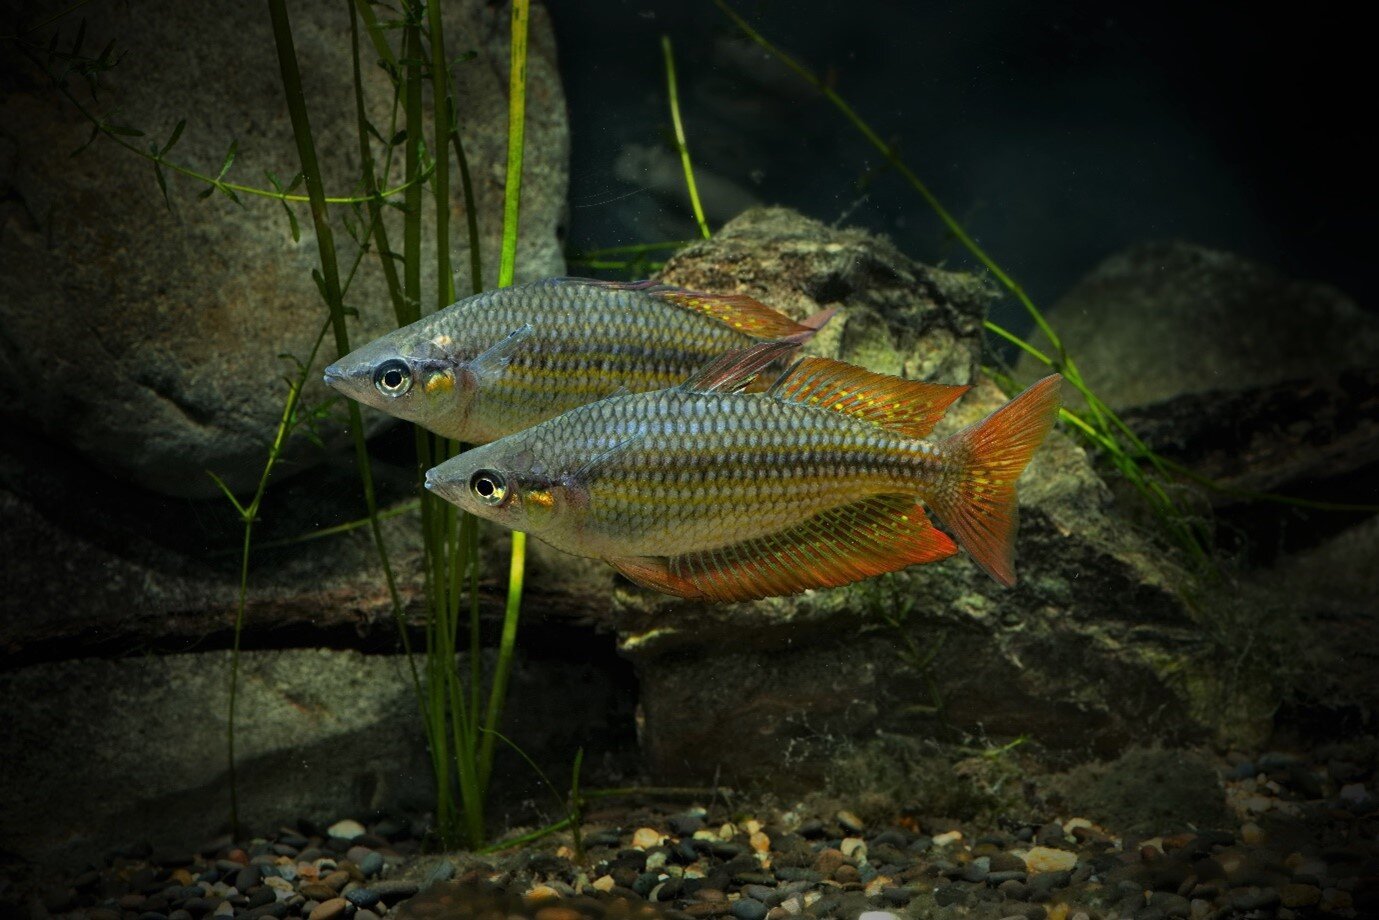 How rainforest fish adapt to local conditions